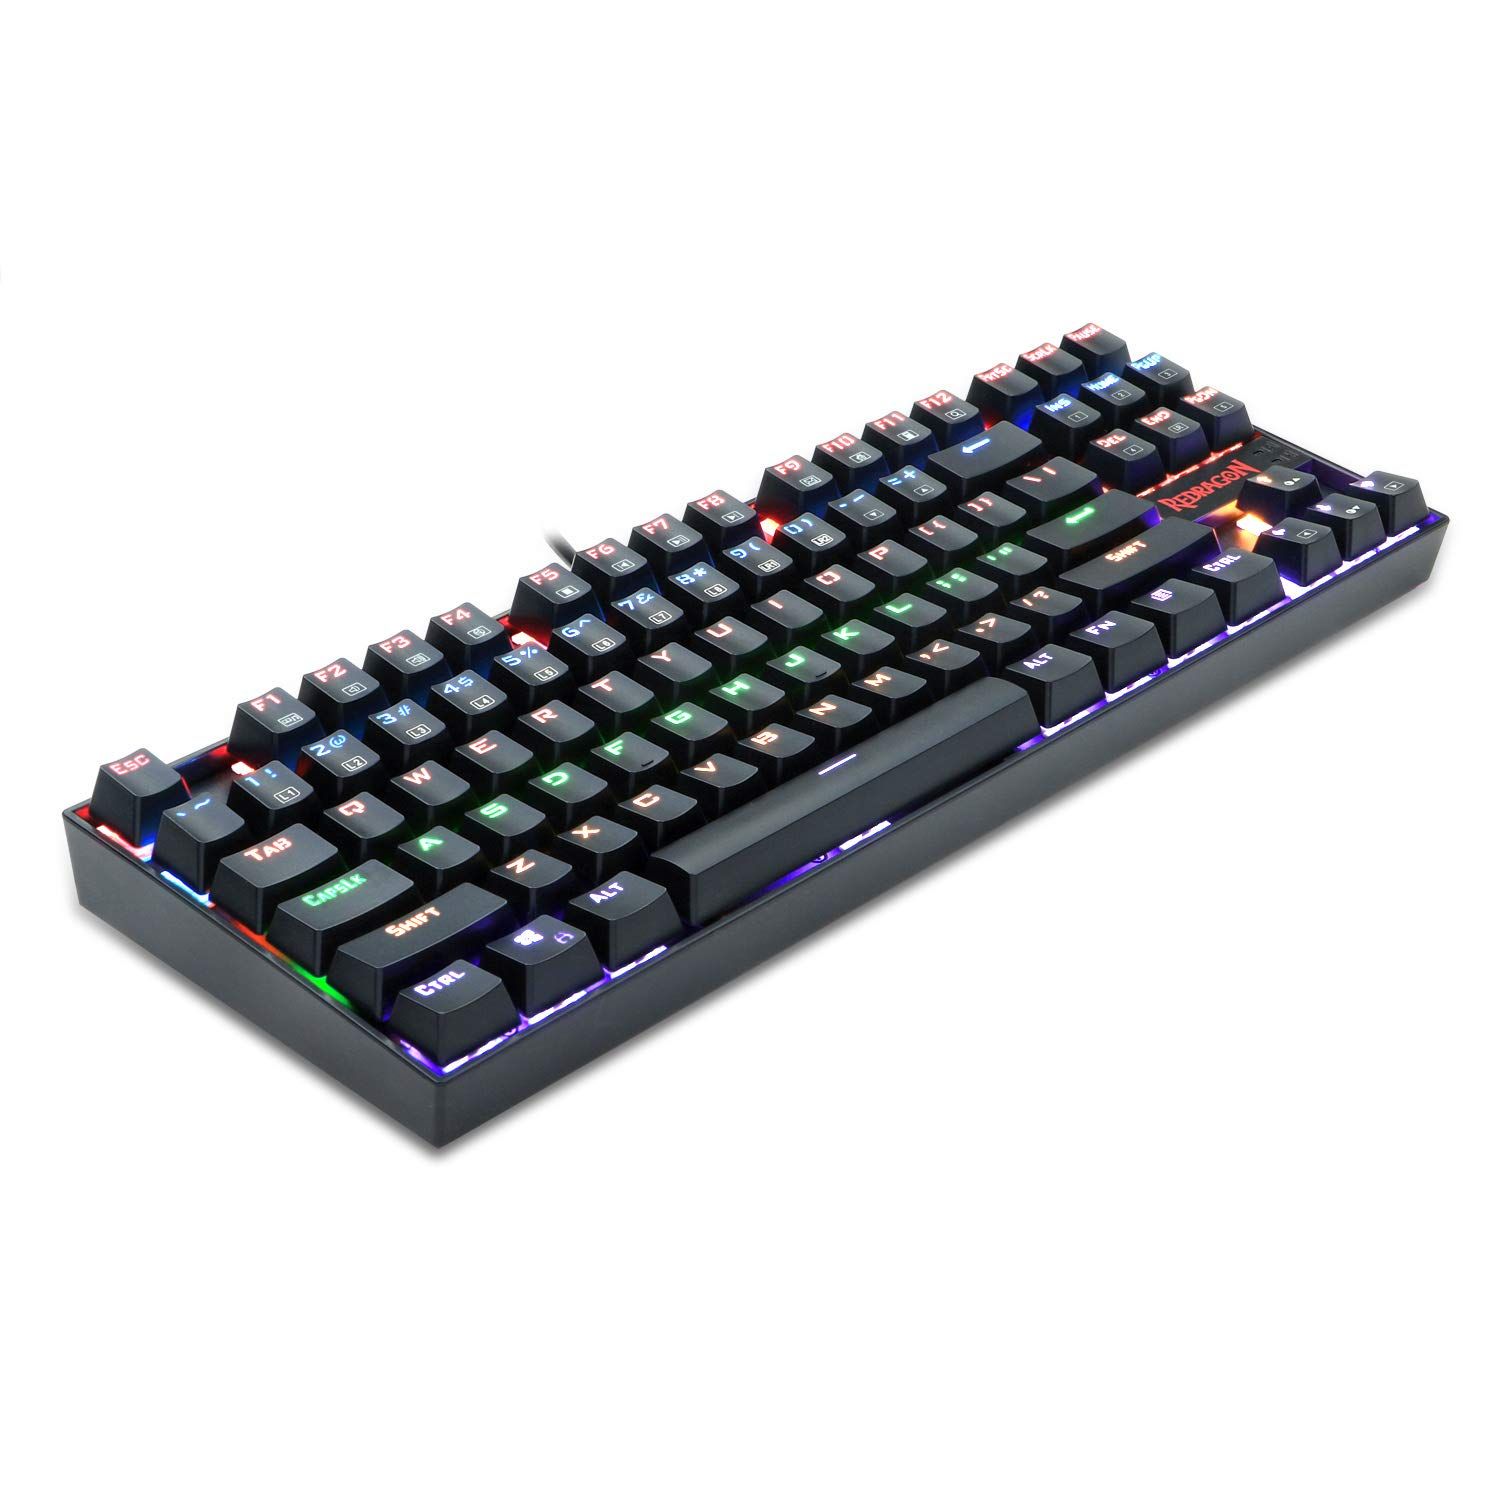 Why gamers should use gaming keyboards?